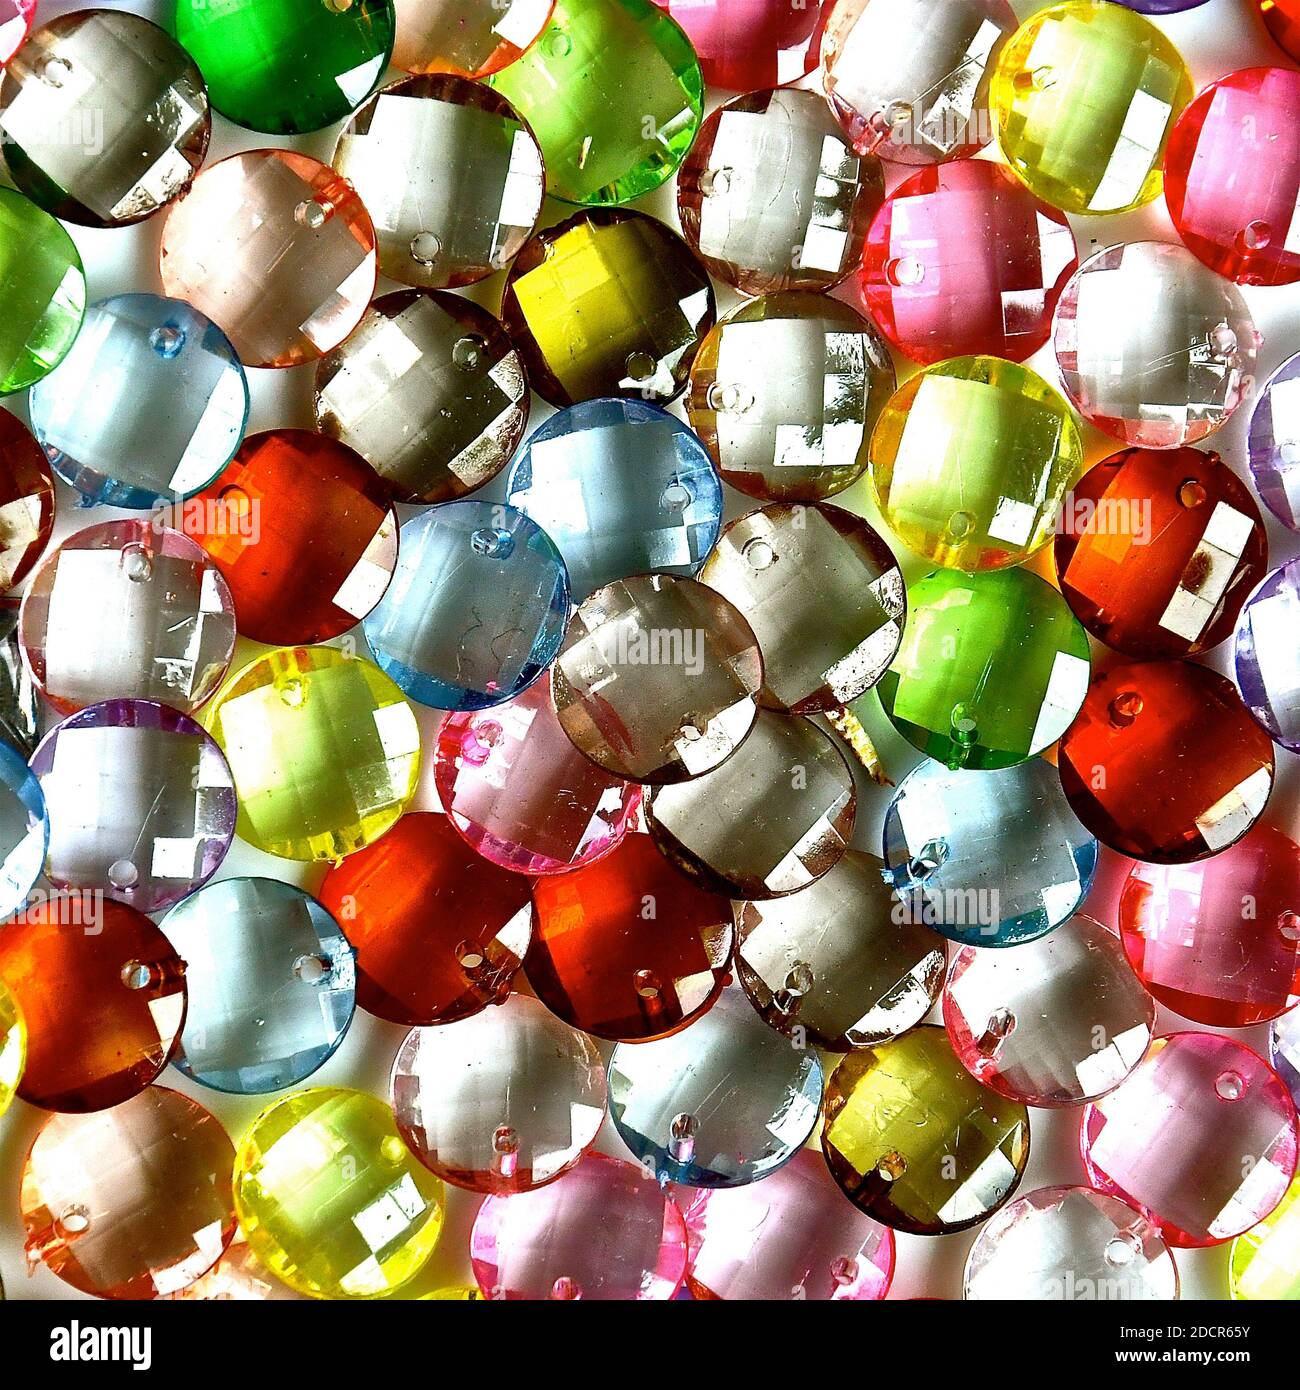 Colourful disc shaped translucent jewels with bevelled facets on the faces. Stock Photo